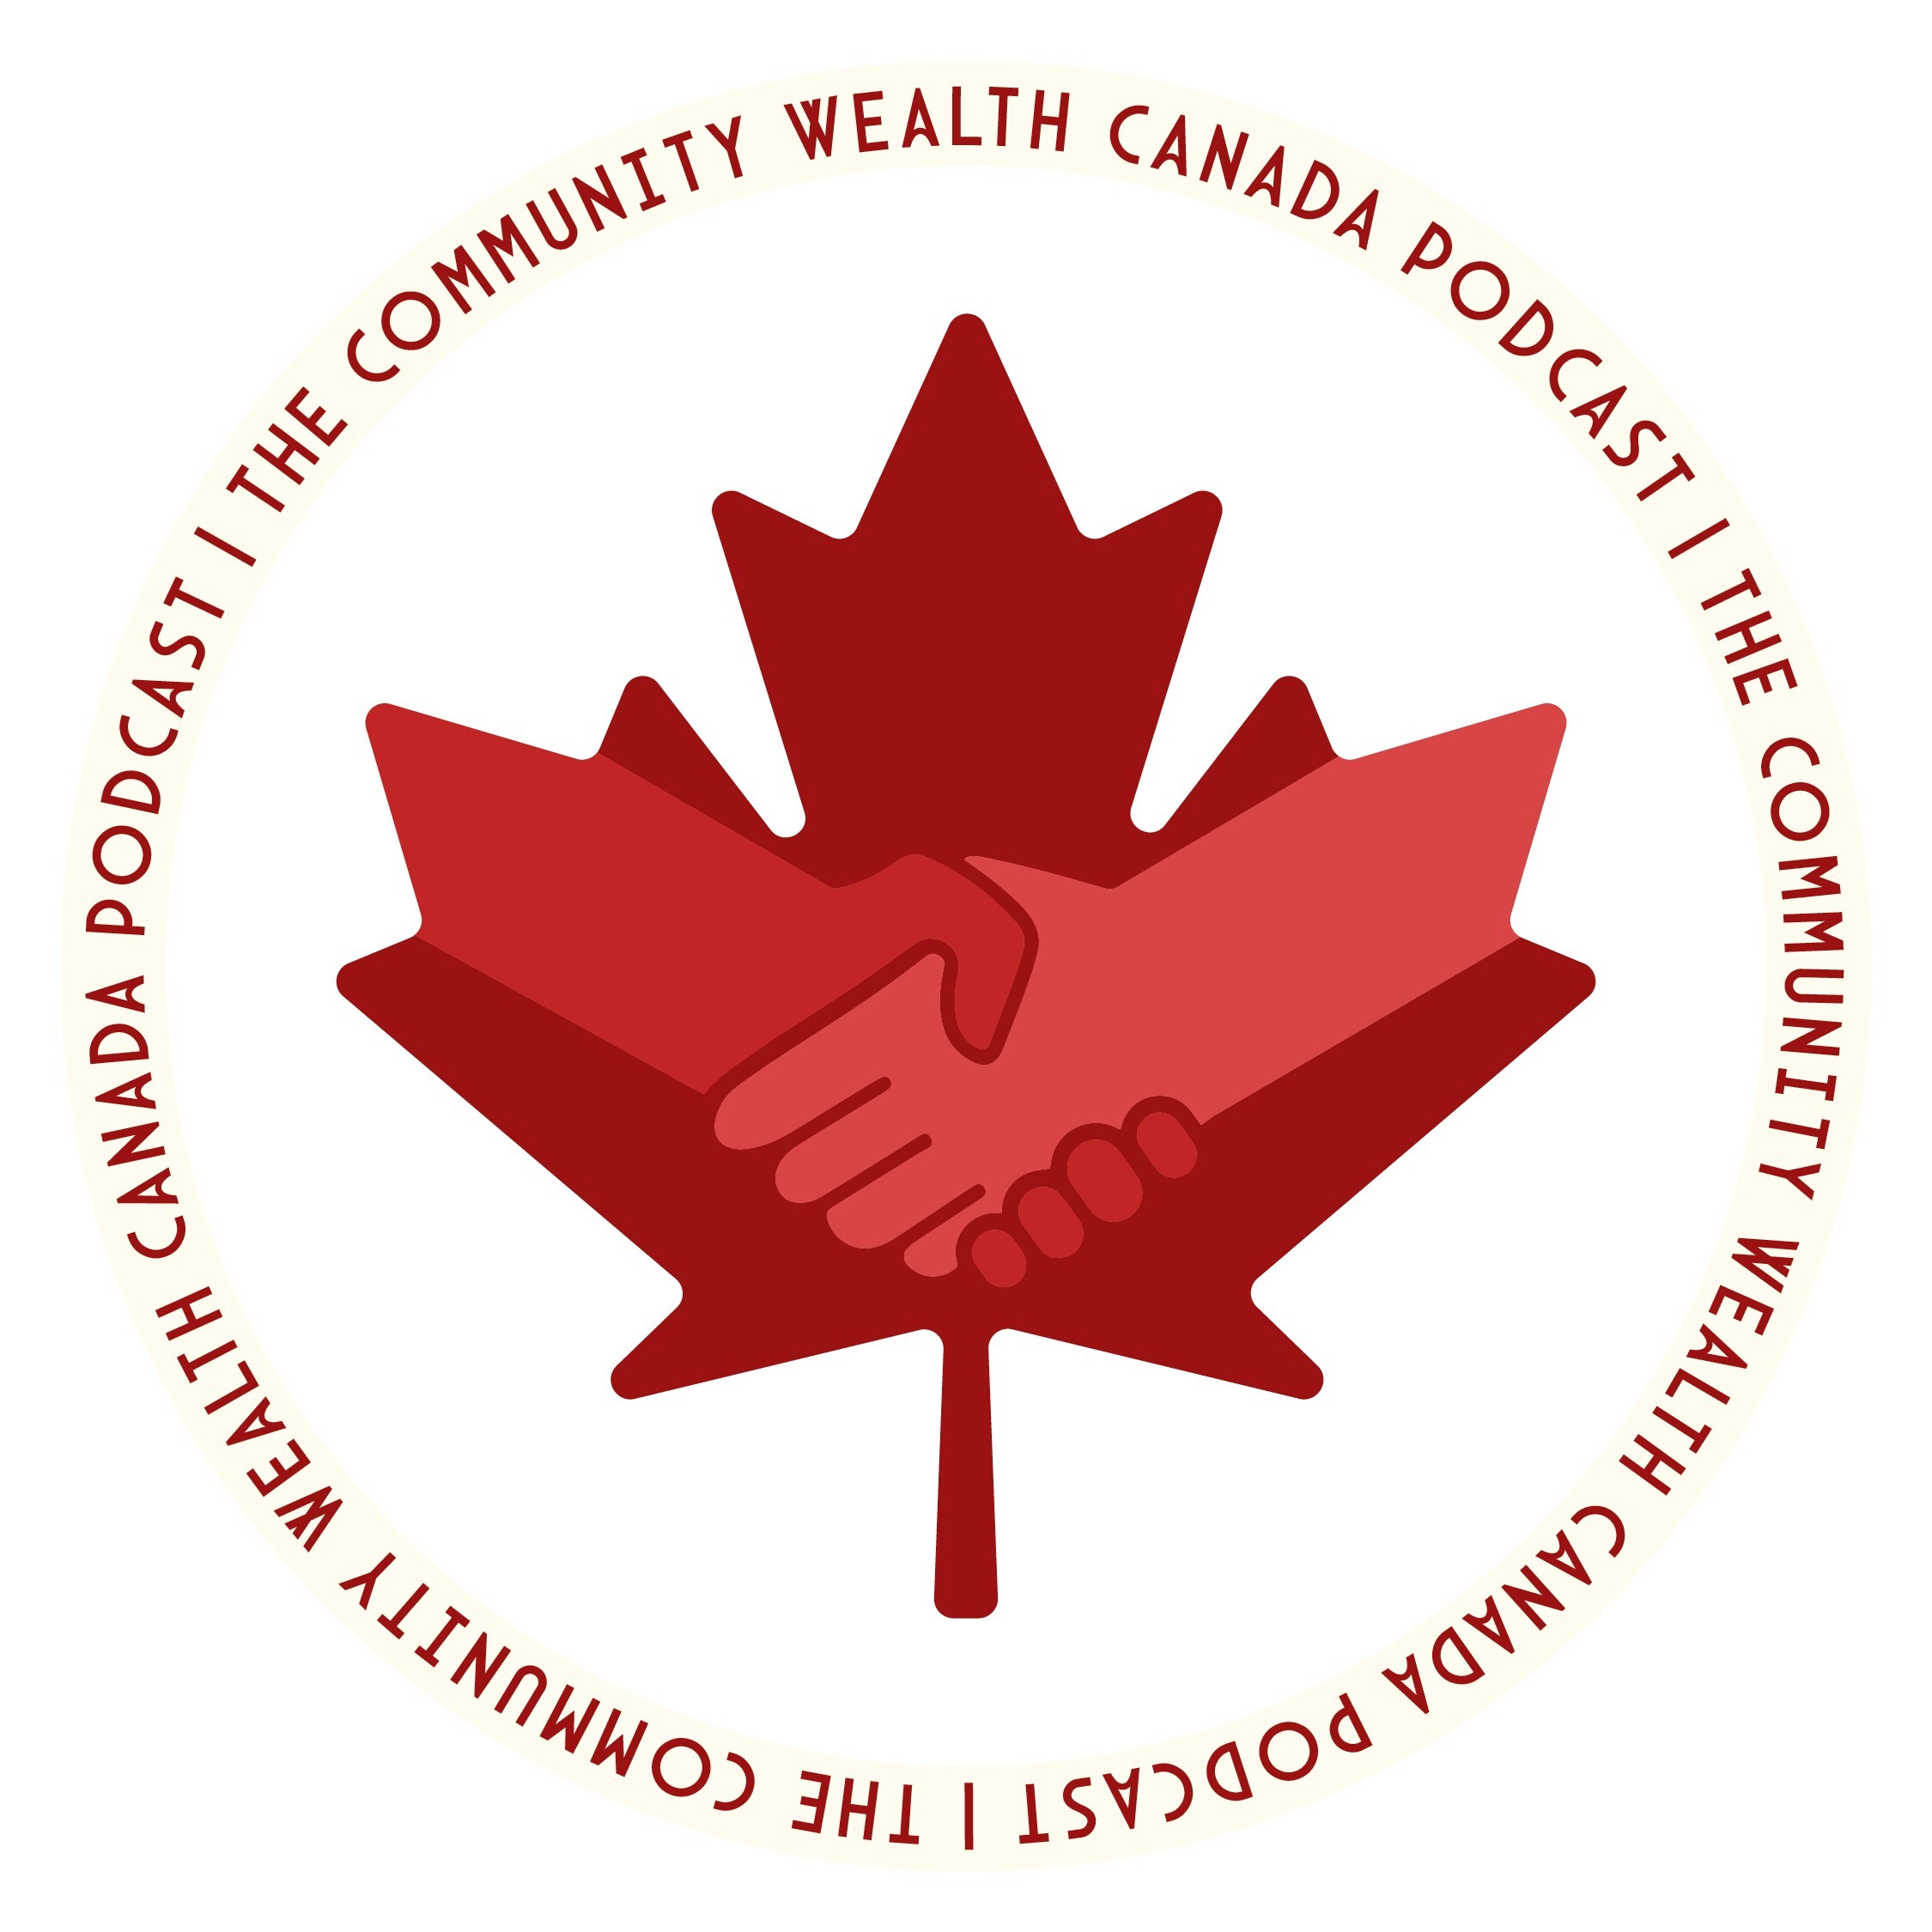 The Community Wealth Canada Podcast